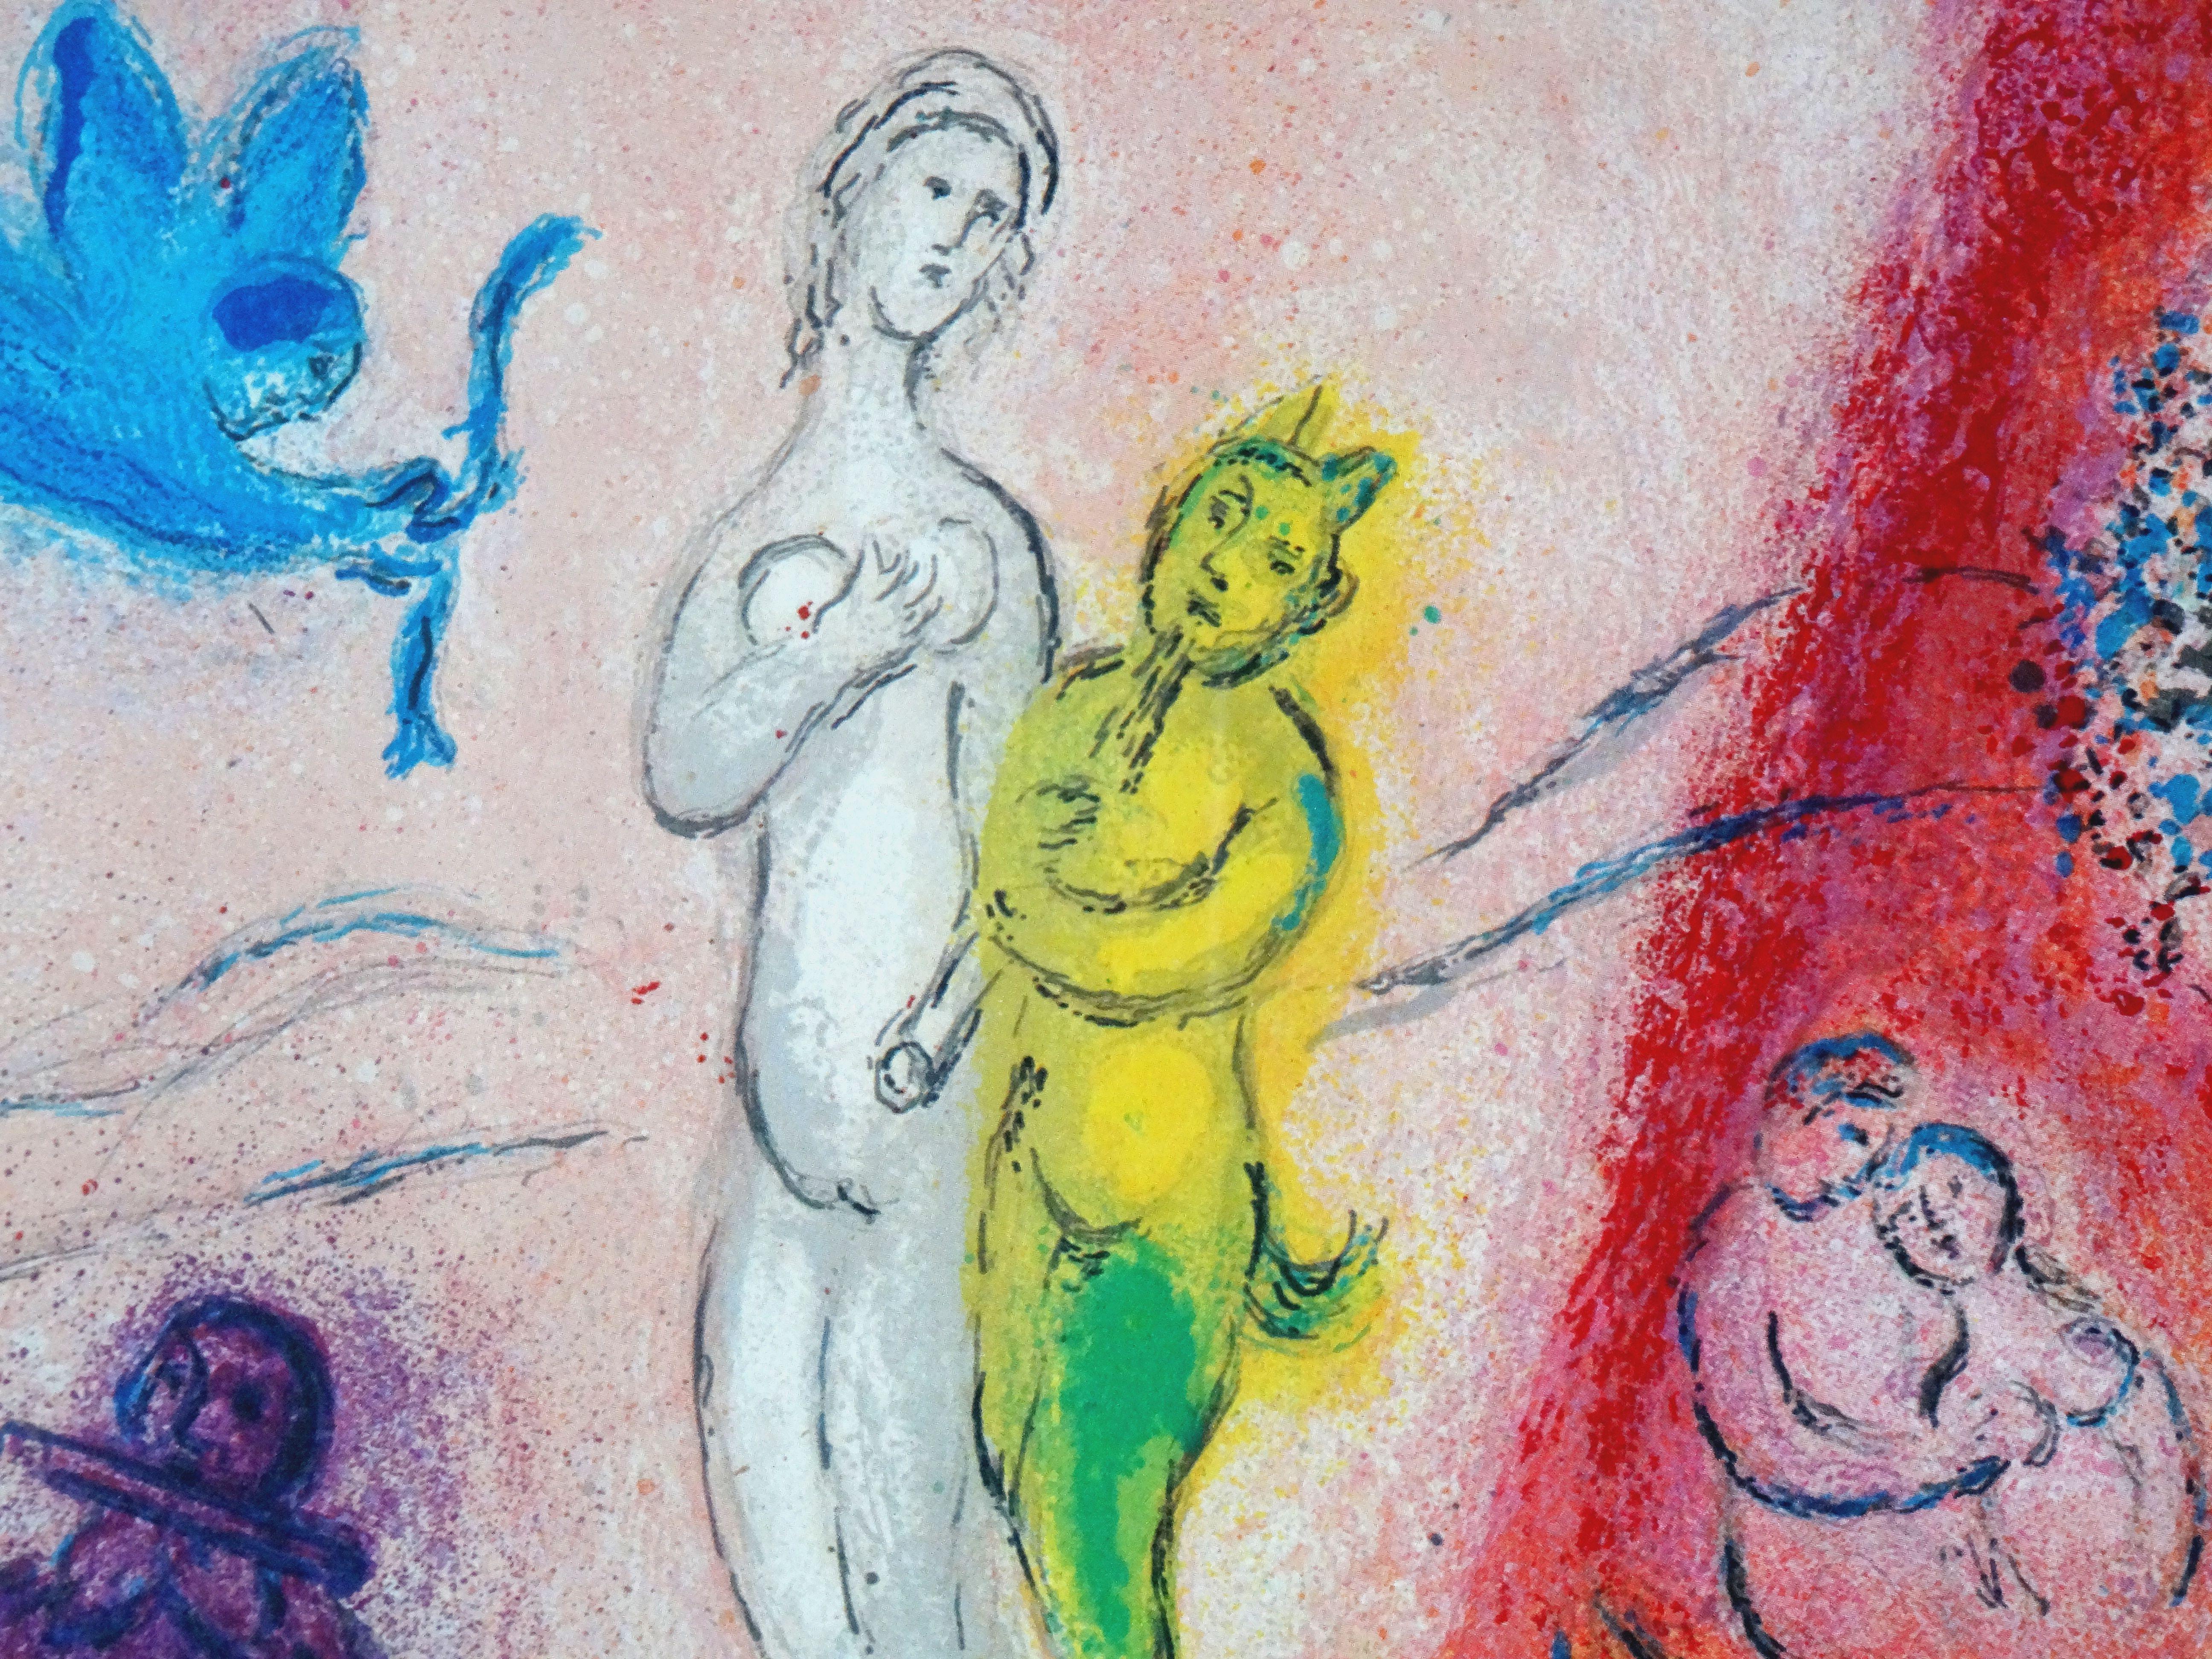 Daphnis and Chloe Suite. 1977, lithography, 33x25 cm  - Expressionist Print by Marc Chagall